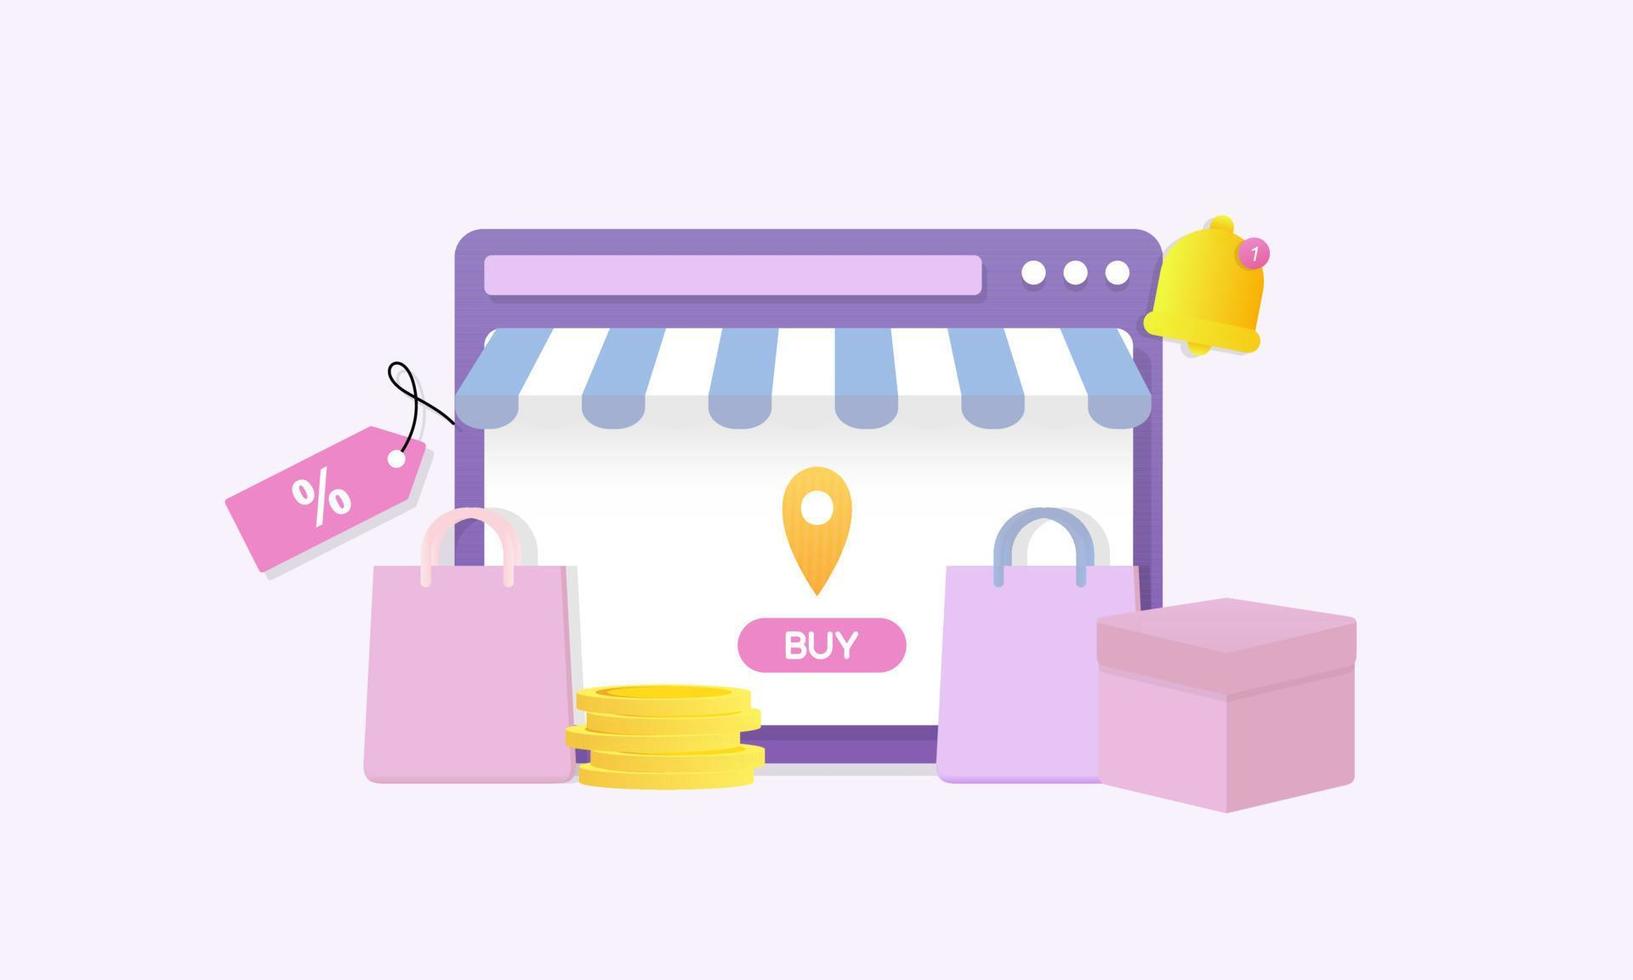 Online shopping 3d illustration, online shop, online payment and delivery concept with floating elements vector